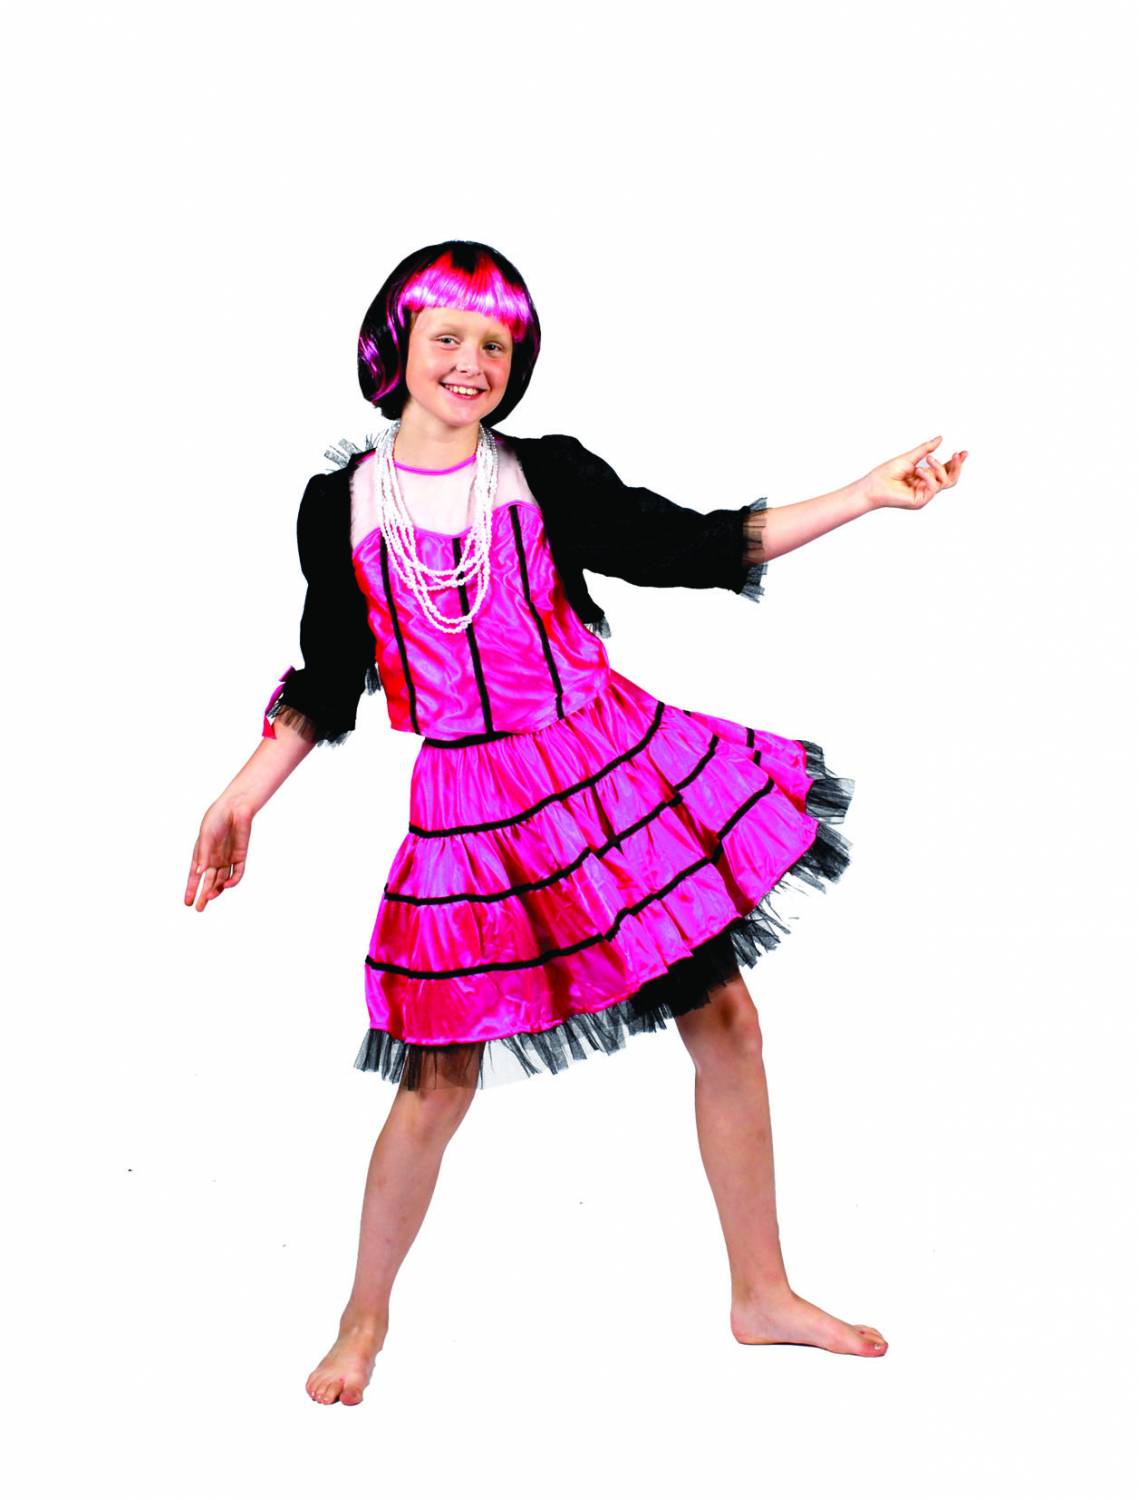 Carnival-costumes: CanCan for kids - Fancy dress